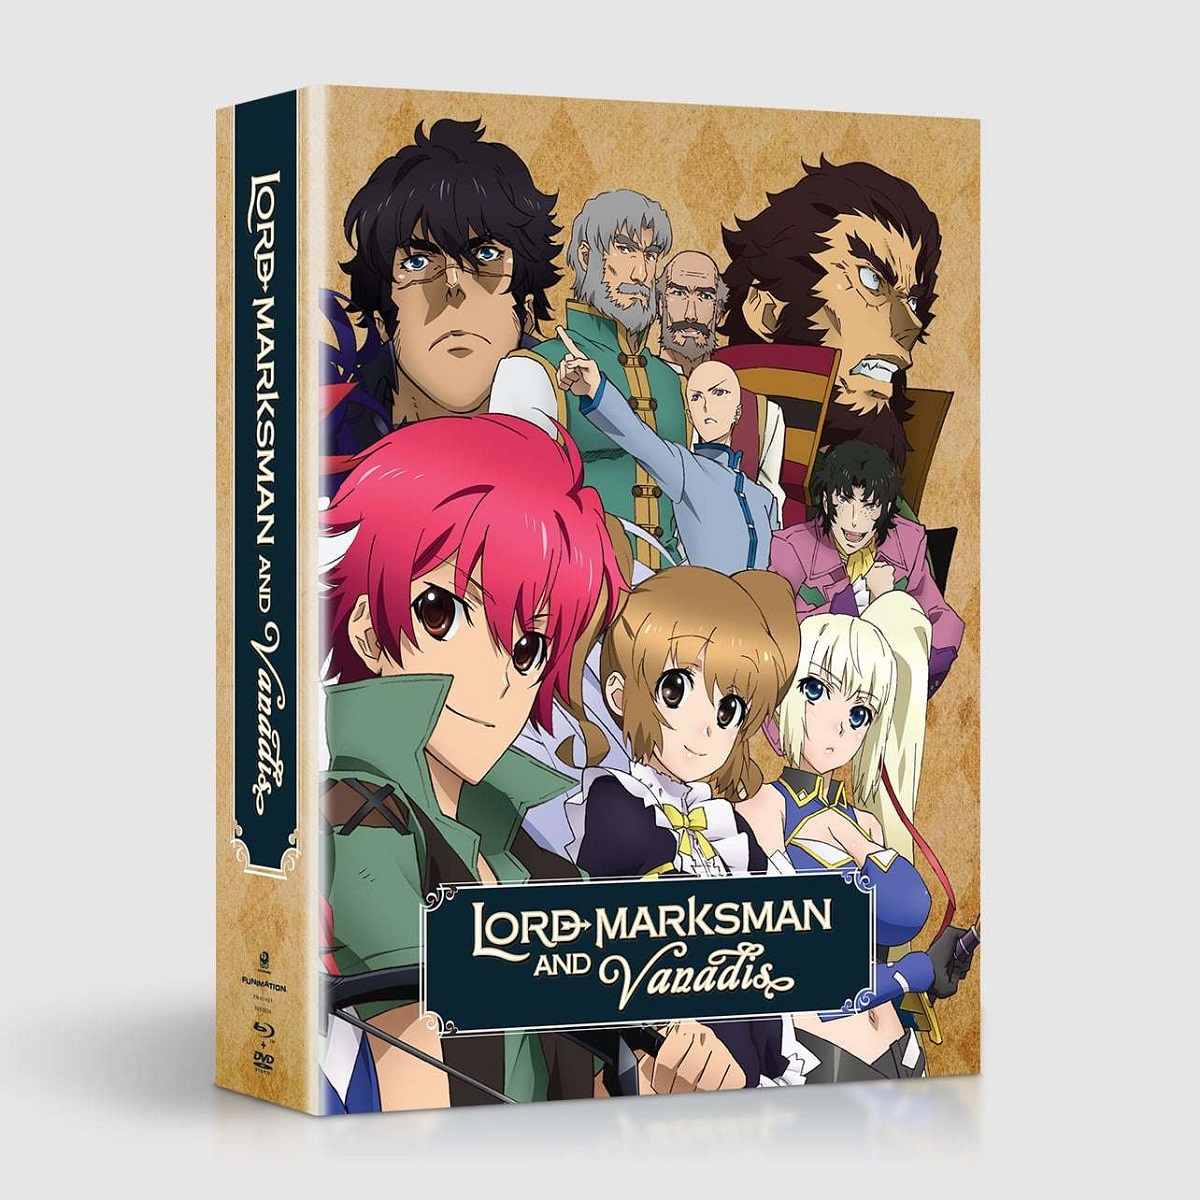 Lord Marskman and Vanadis - The Complete Series - Limited Edition - Blu-ray + DVD image count 0